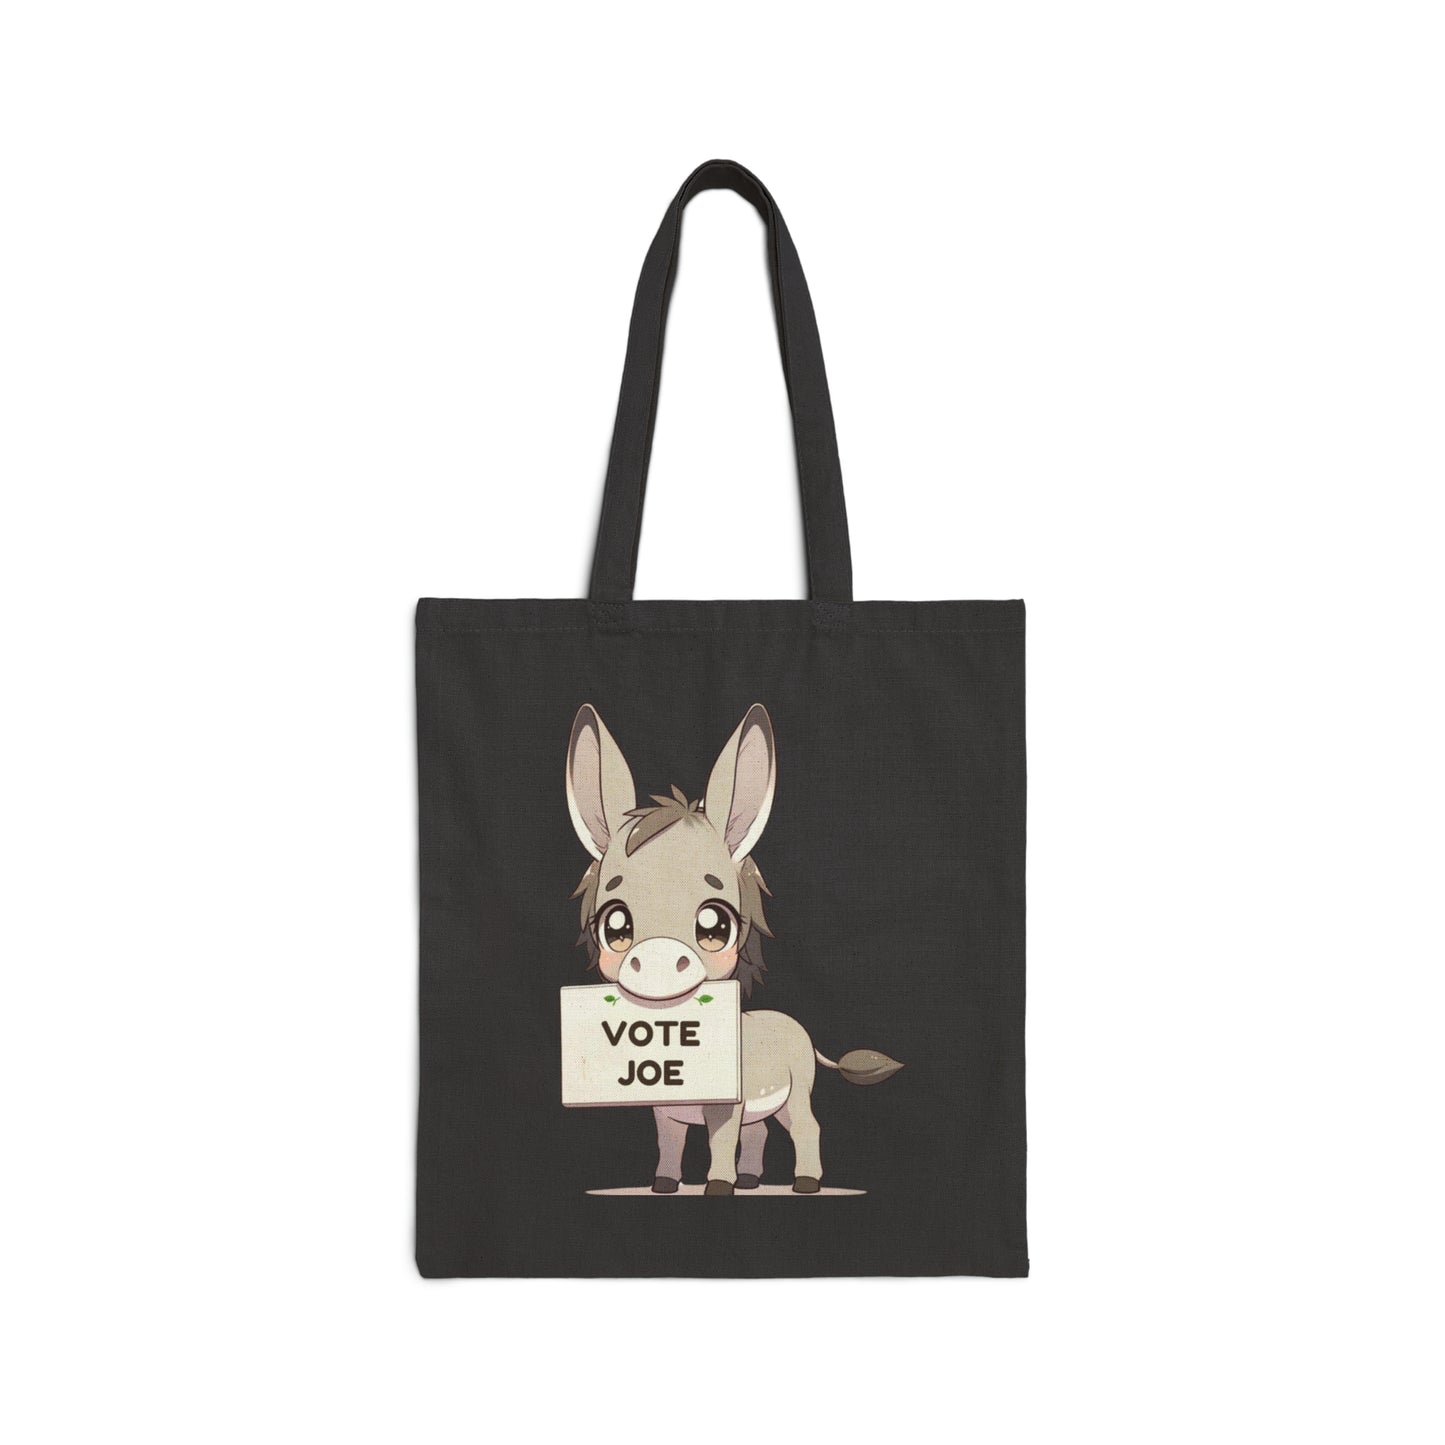 Cute Elephant and Cute Donkey Agree! Vote Joe this November! Statement Cotton Canvas Tote Bag: laptop, kindle, goodies to work/coffee shop